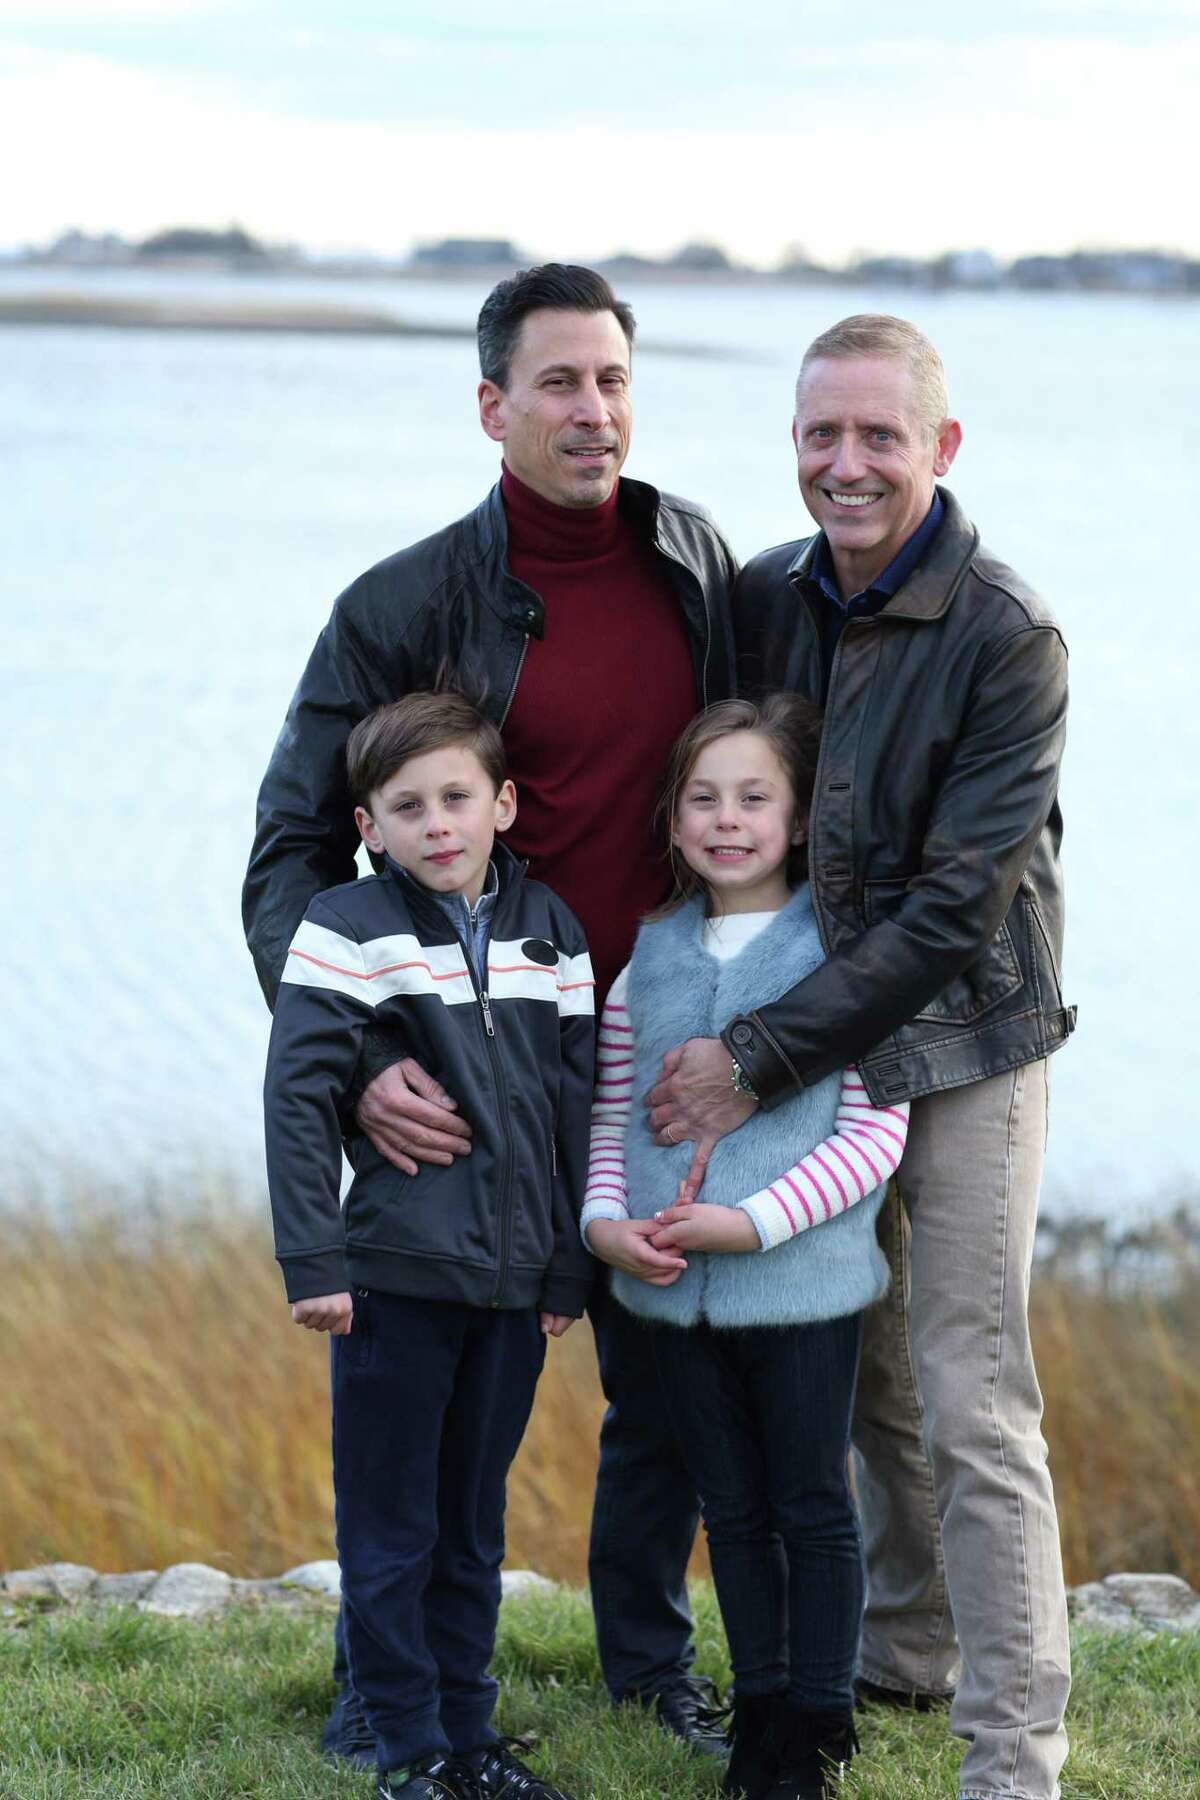 Mark Ciano and Chris Buckley pose for a family portrait with their twin children, Connor and Ayla Ciano-Buckley.